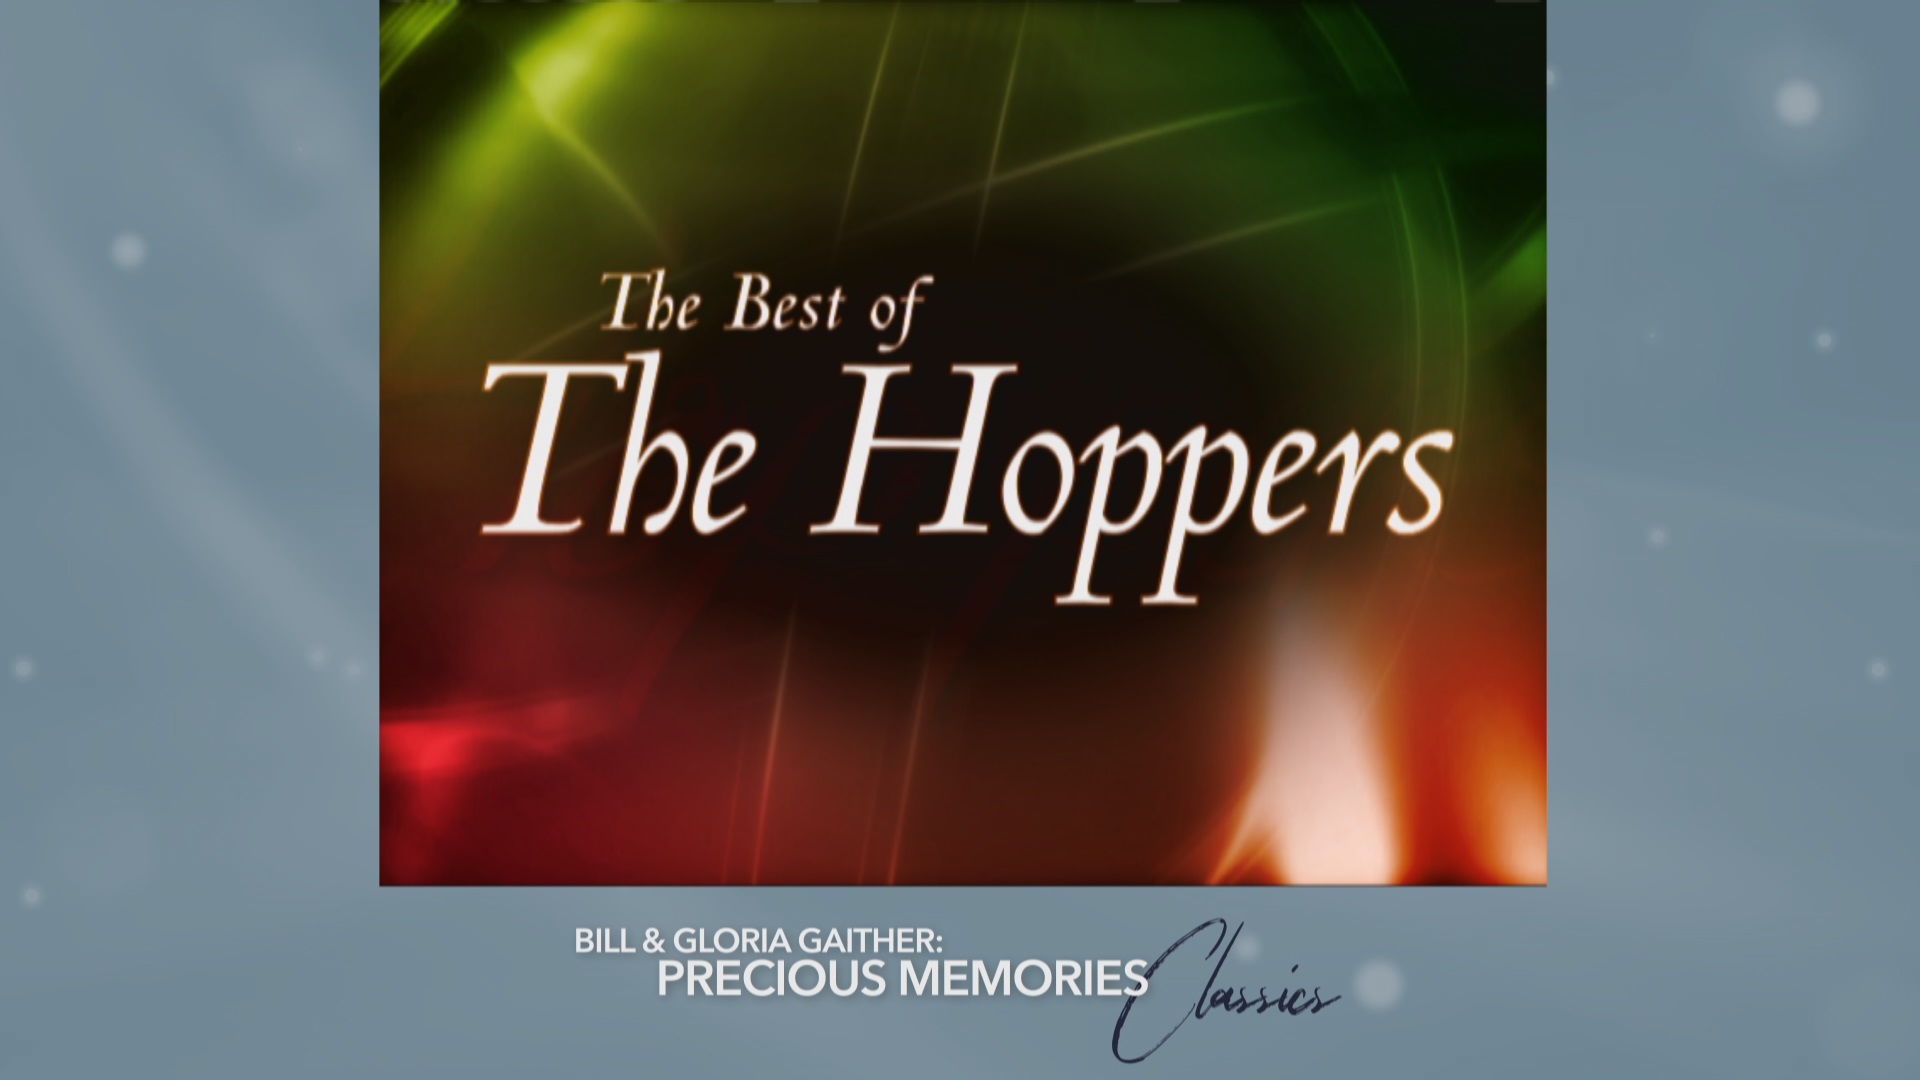 The Best of The Hoppers